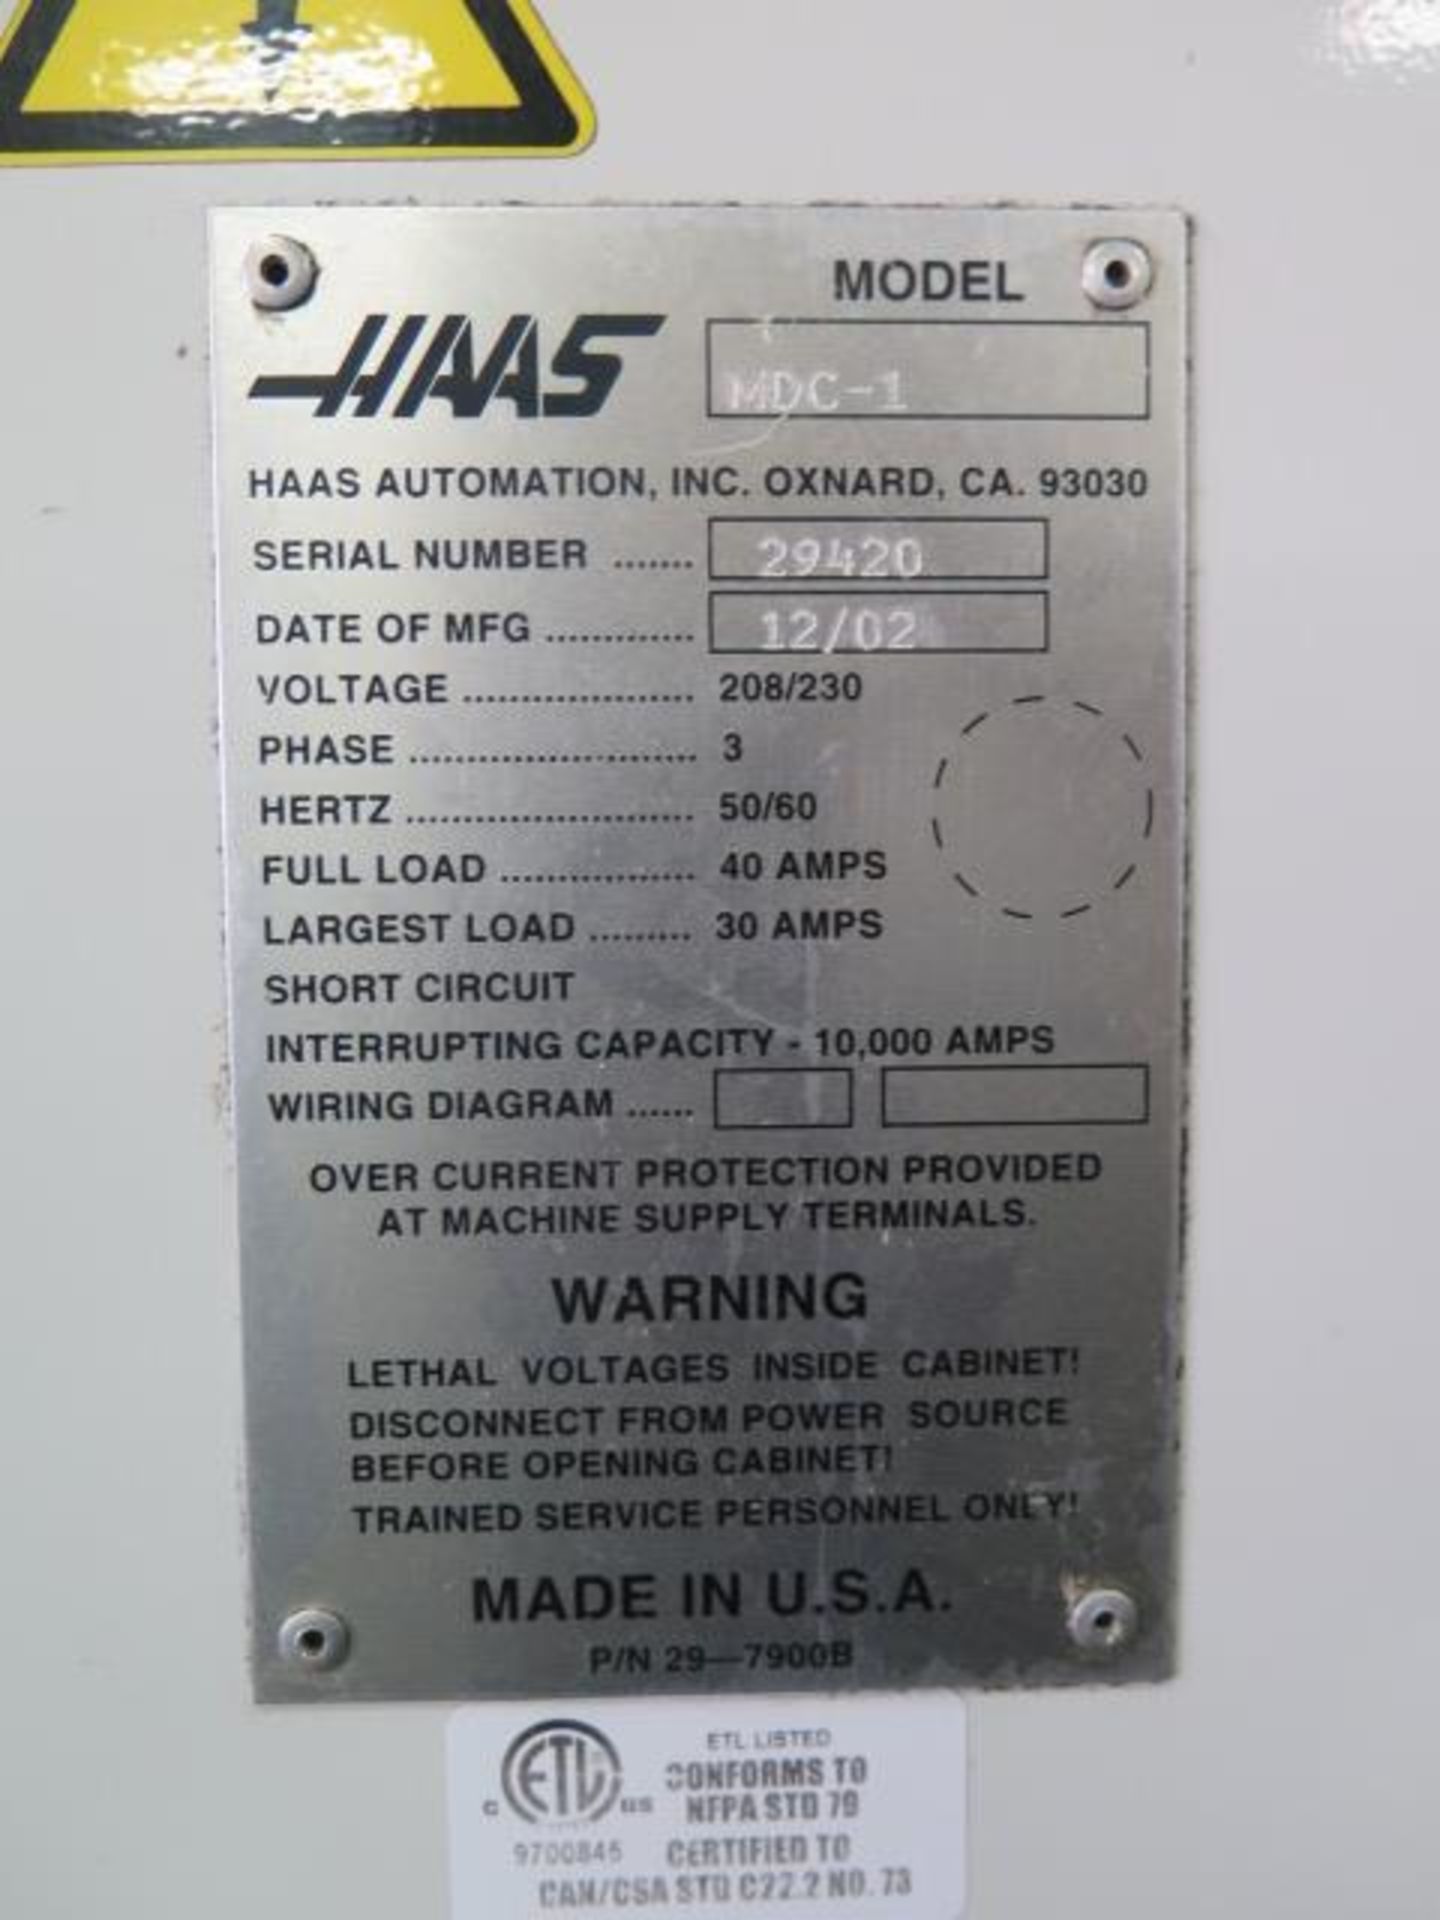 2002 Haas MDC-1 Dual Pallet CNC Milling Center s/n 29420 (Pallet Changer Needs Repair), SOLD AS IS - Image 16 of 16